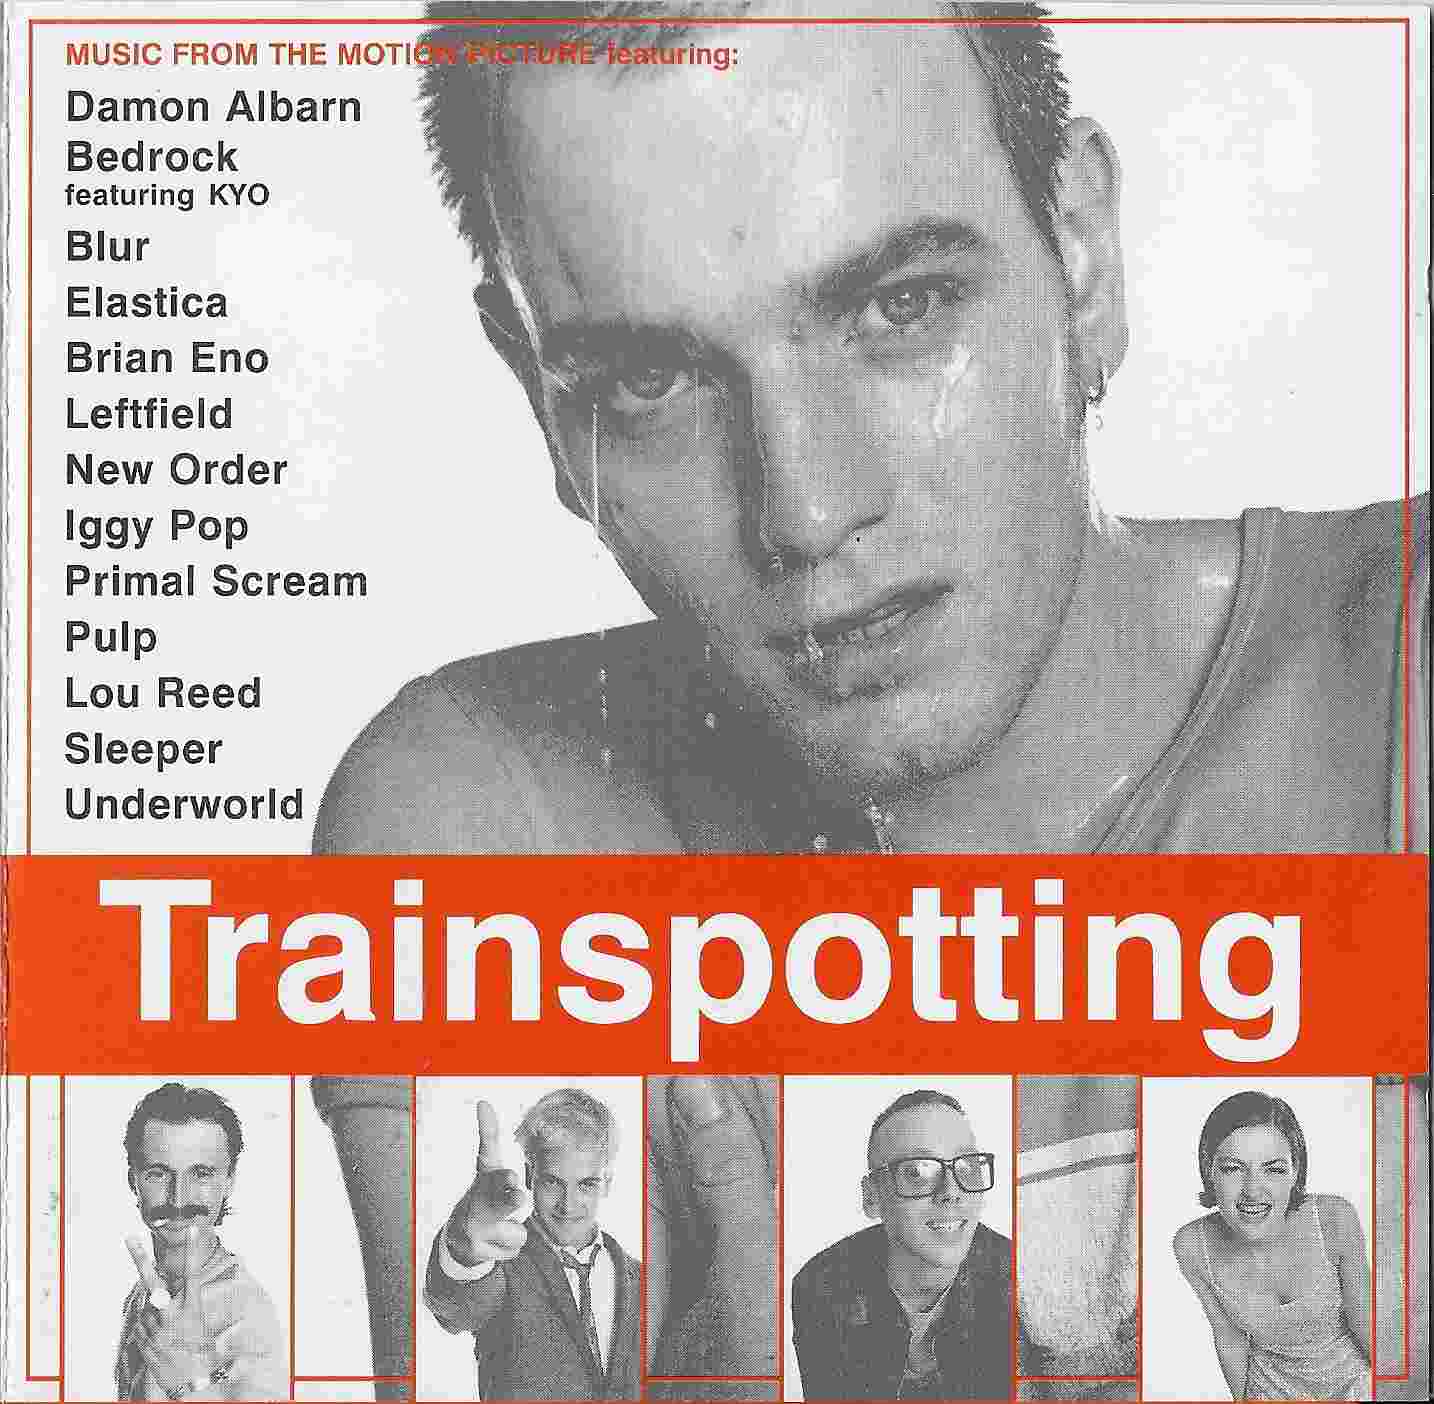 Picture of CDEM 3739 Trainspotting by artist Various from ITV, Channel 4 and Channel 5 library